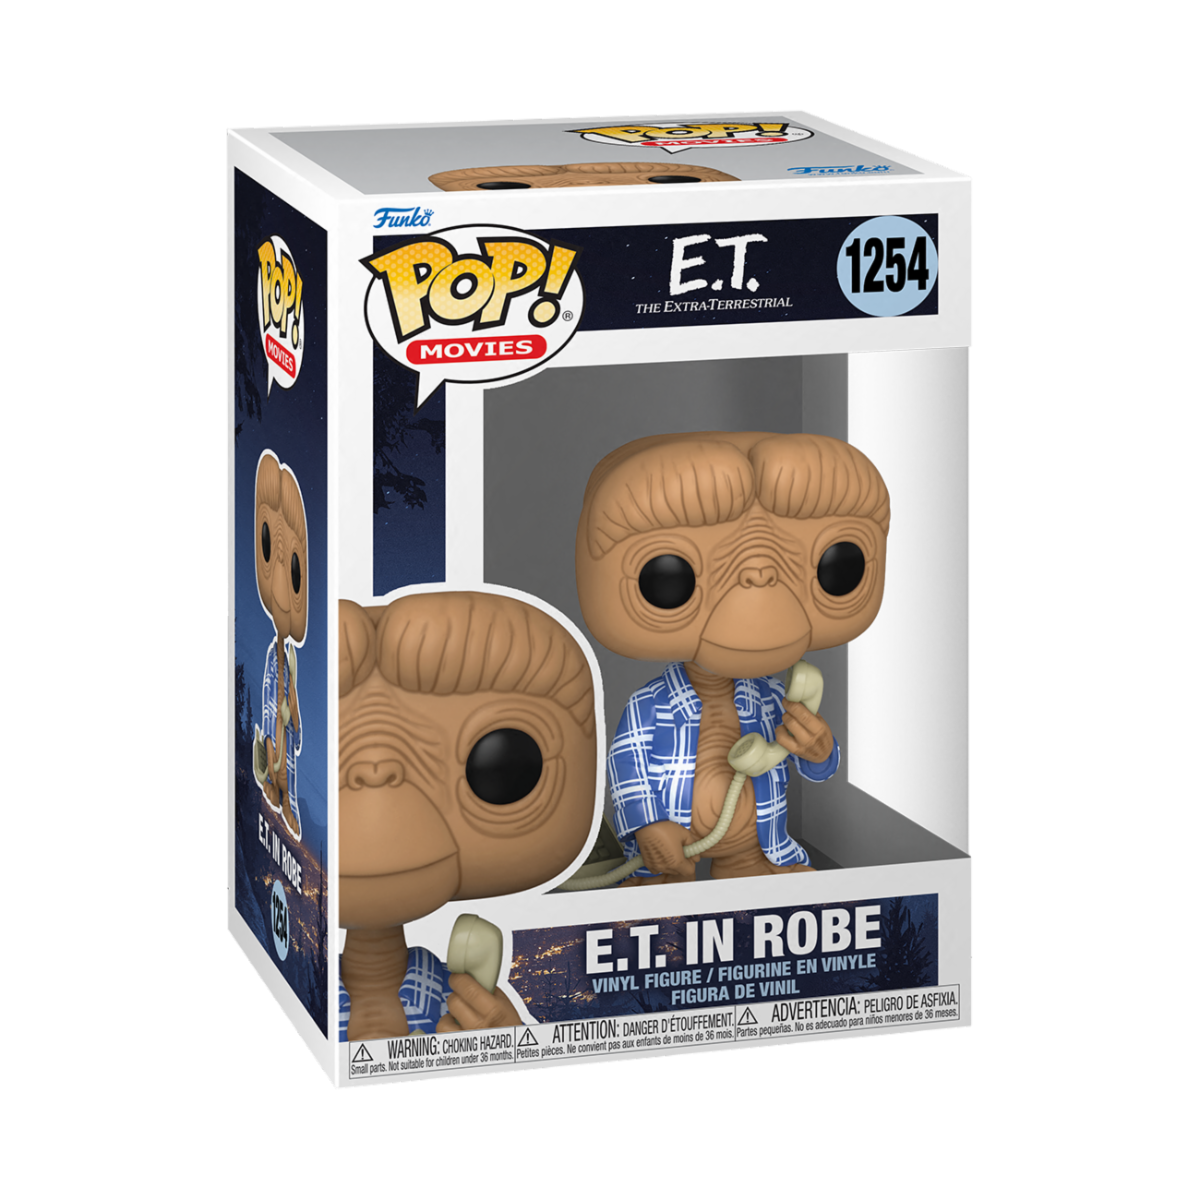 https://cdnx.jumpseller.com/playerspot/image/28460968/c161b00-133420-funko-pop-movies-et-the-extra-terrestrial-et-in-robe-1254.png?1666016245